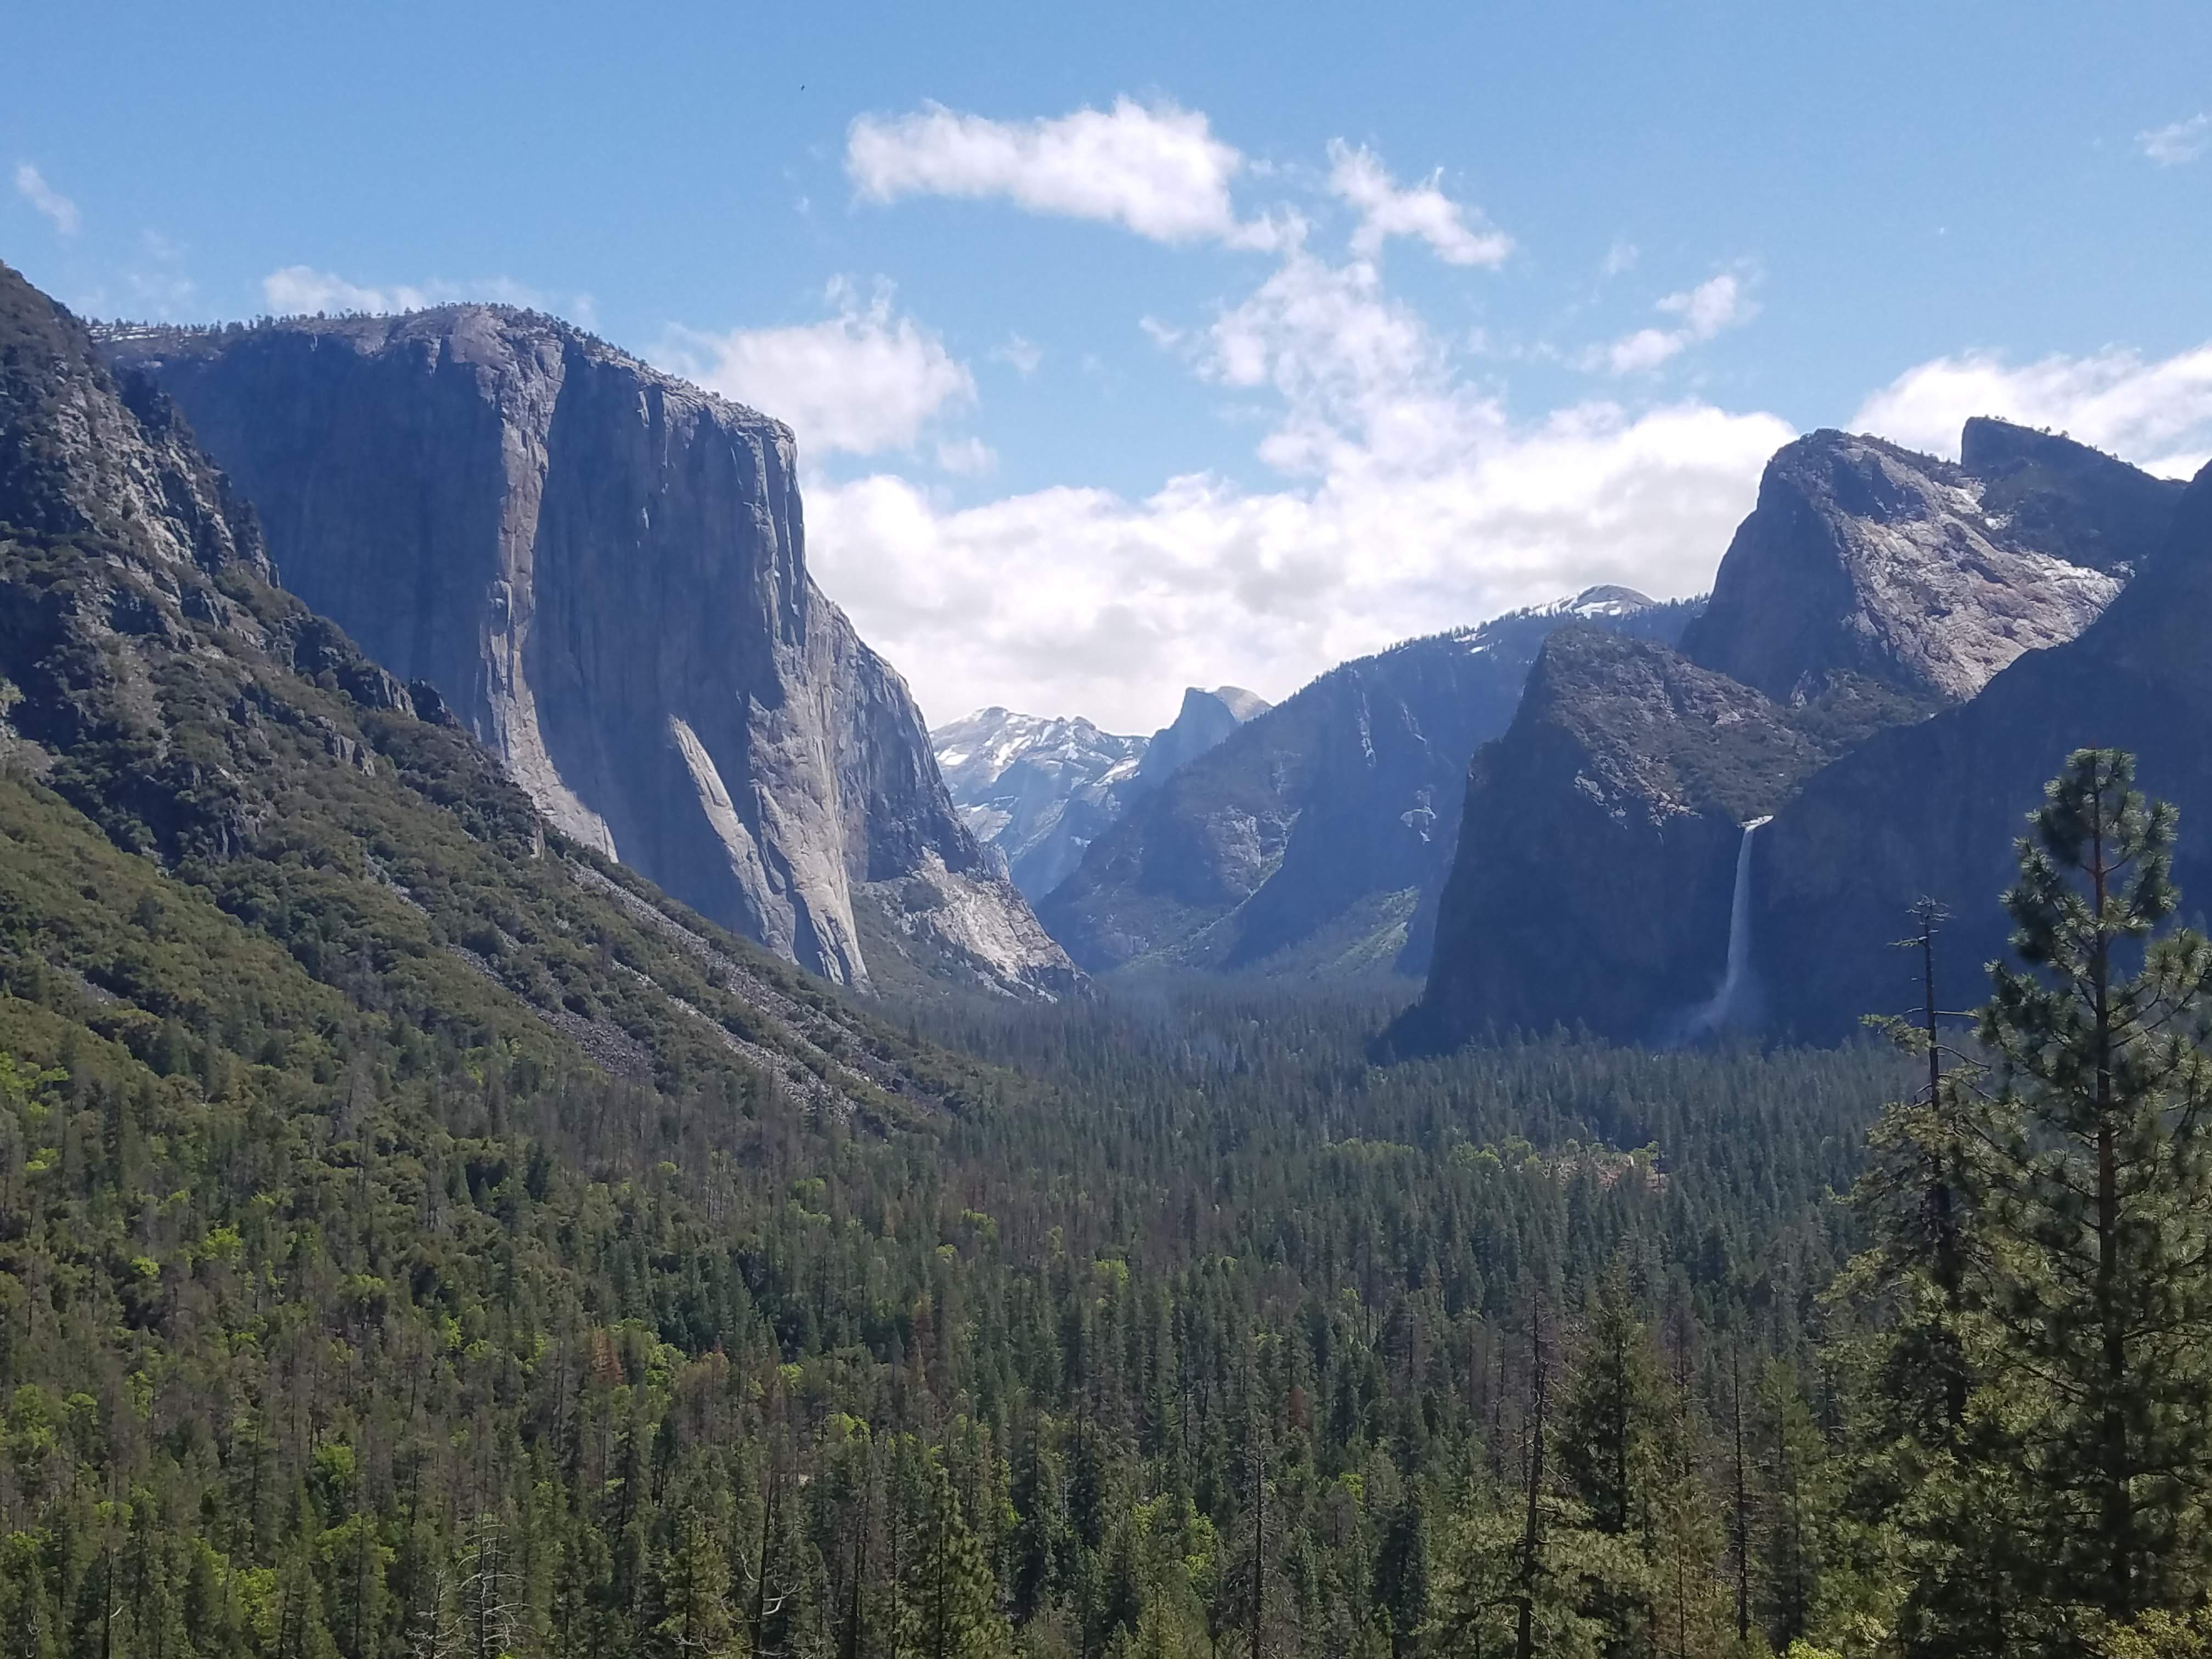 The grand reveal from Tunnel View. Driving from Wawona, you enter a tunnel which spirits you to this magical valley view. Bridalveil Fall, Half Dome, Glacier Point, and El Cap can be seen here. 